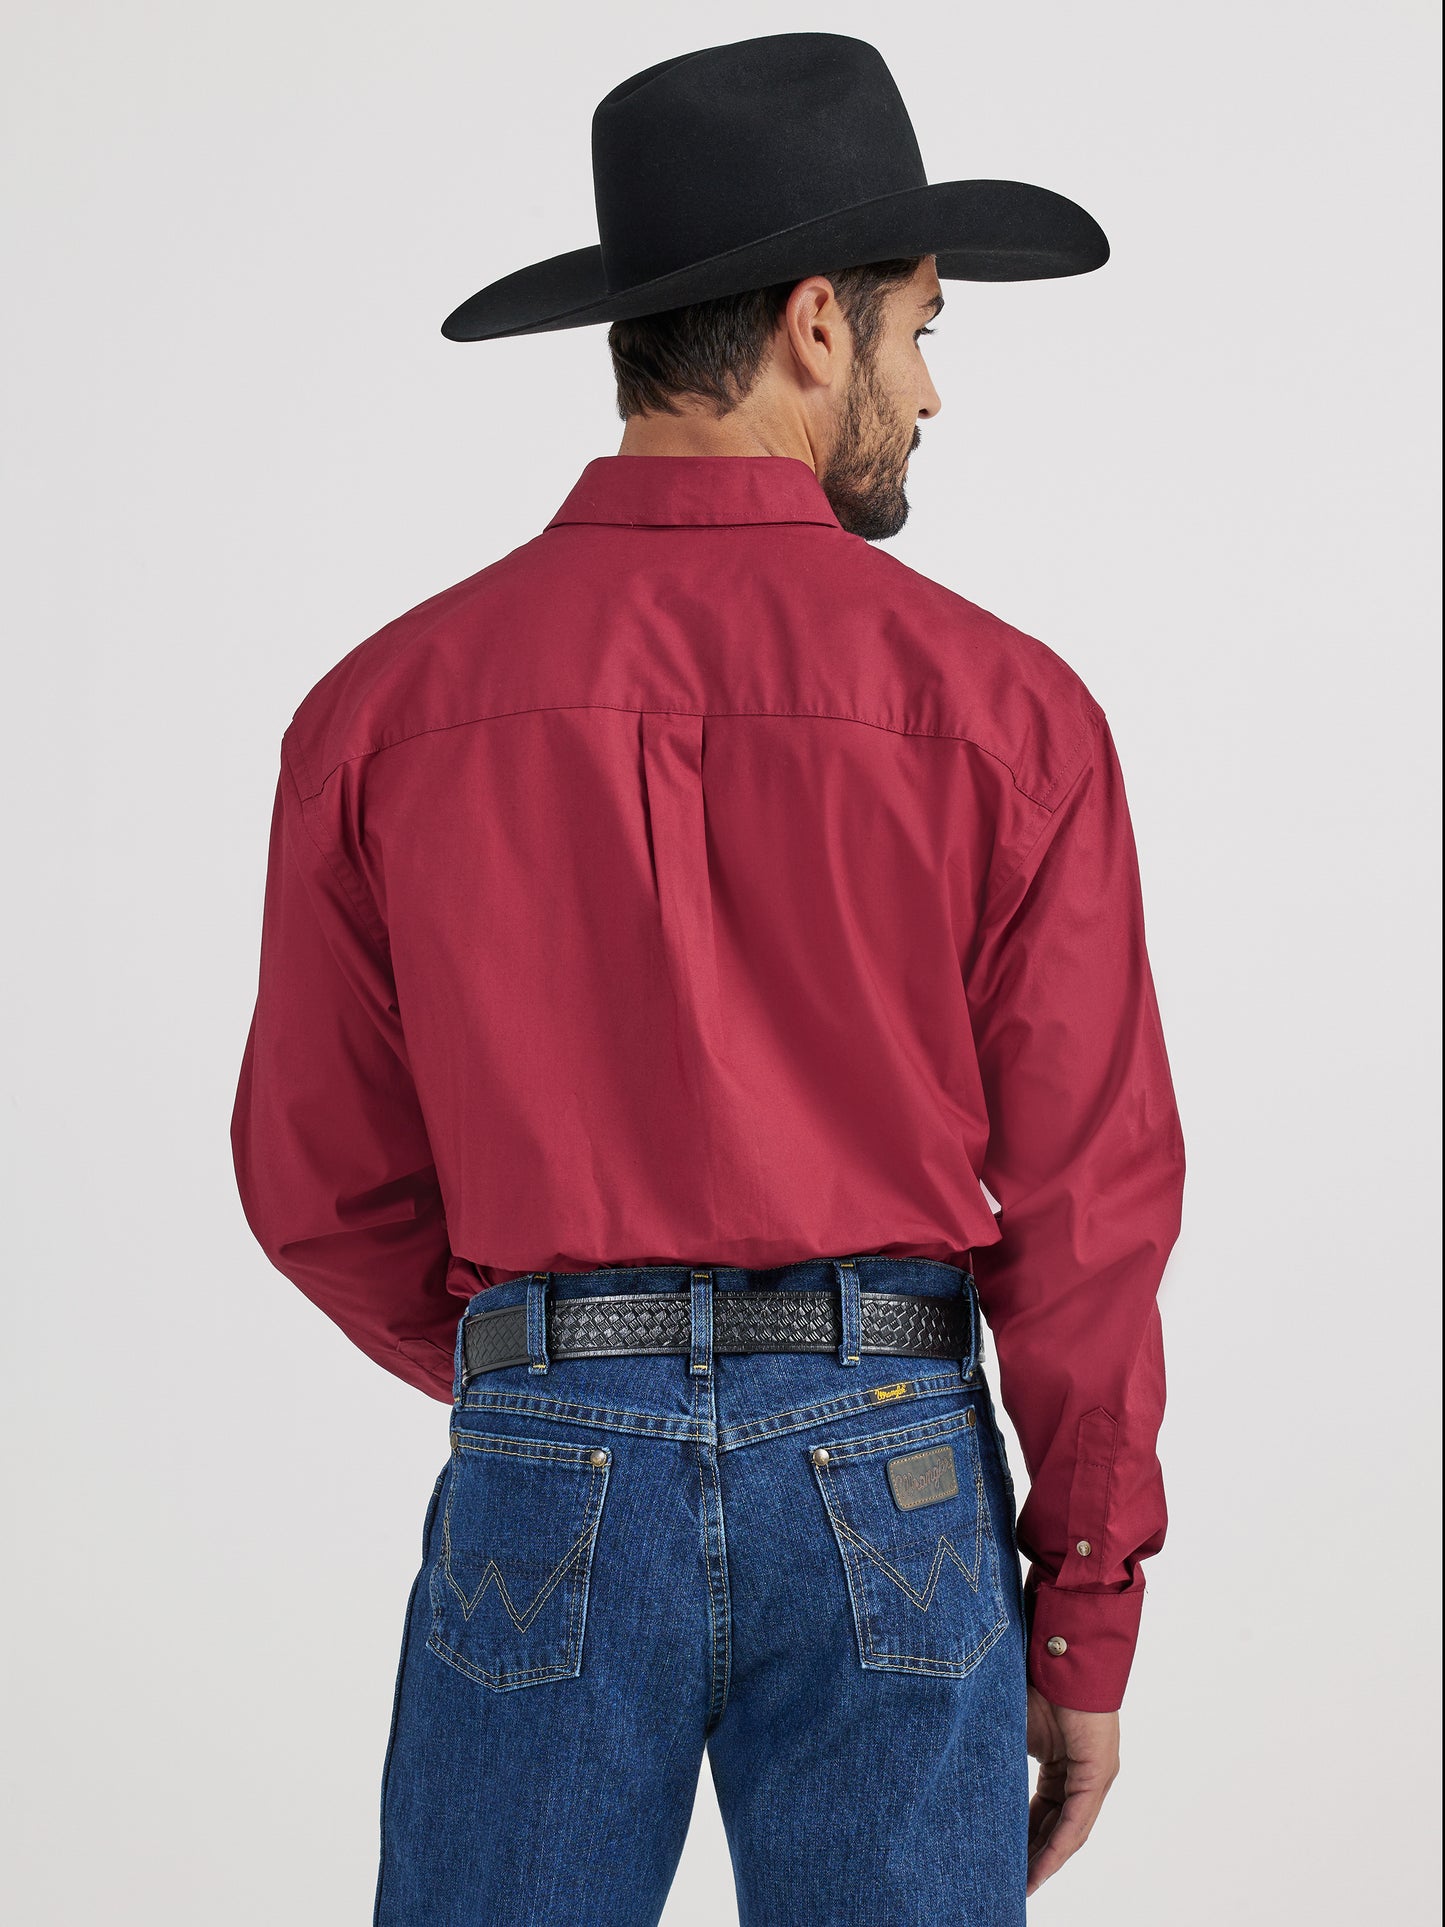 WRANGLER GEORGE STRAIT SOLID RED LONG SLEEVE SHIRT